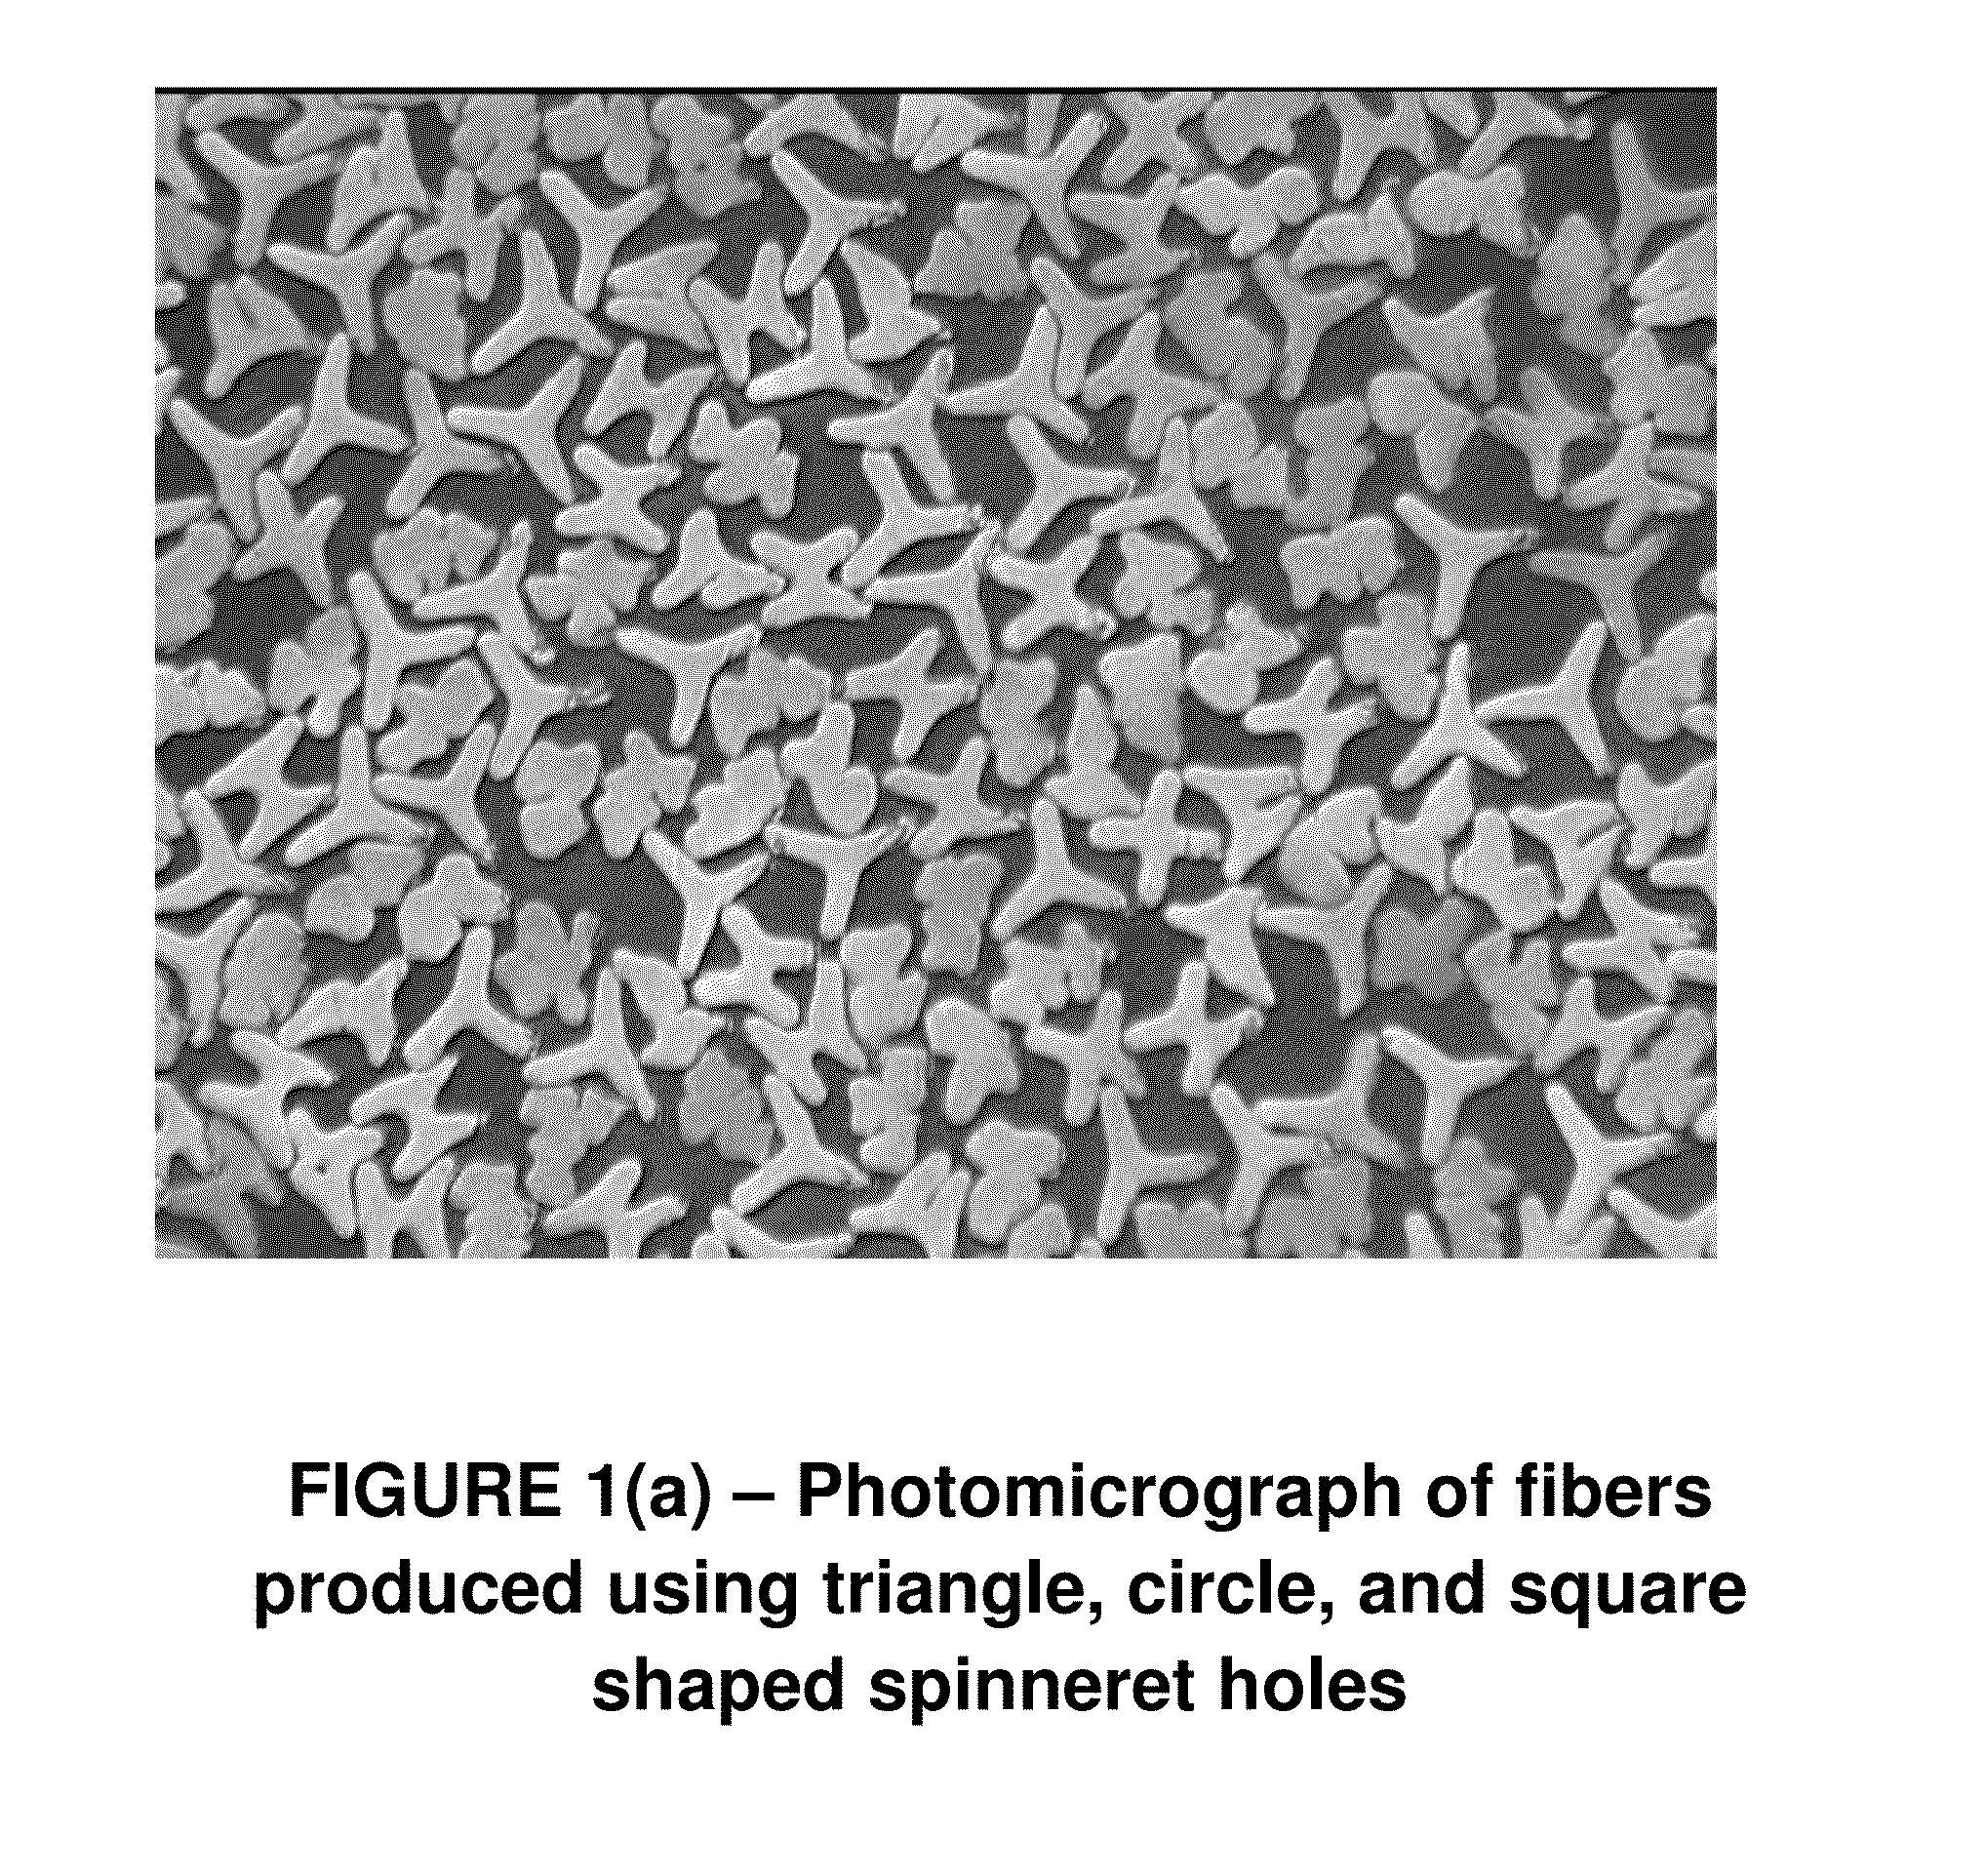 Fibers with chemical markers and physical features used for coding